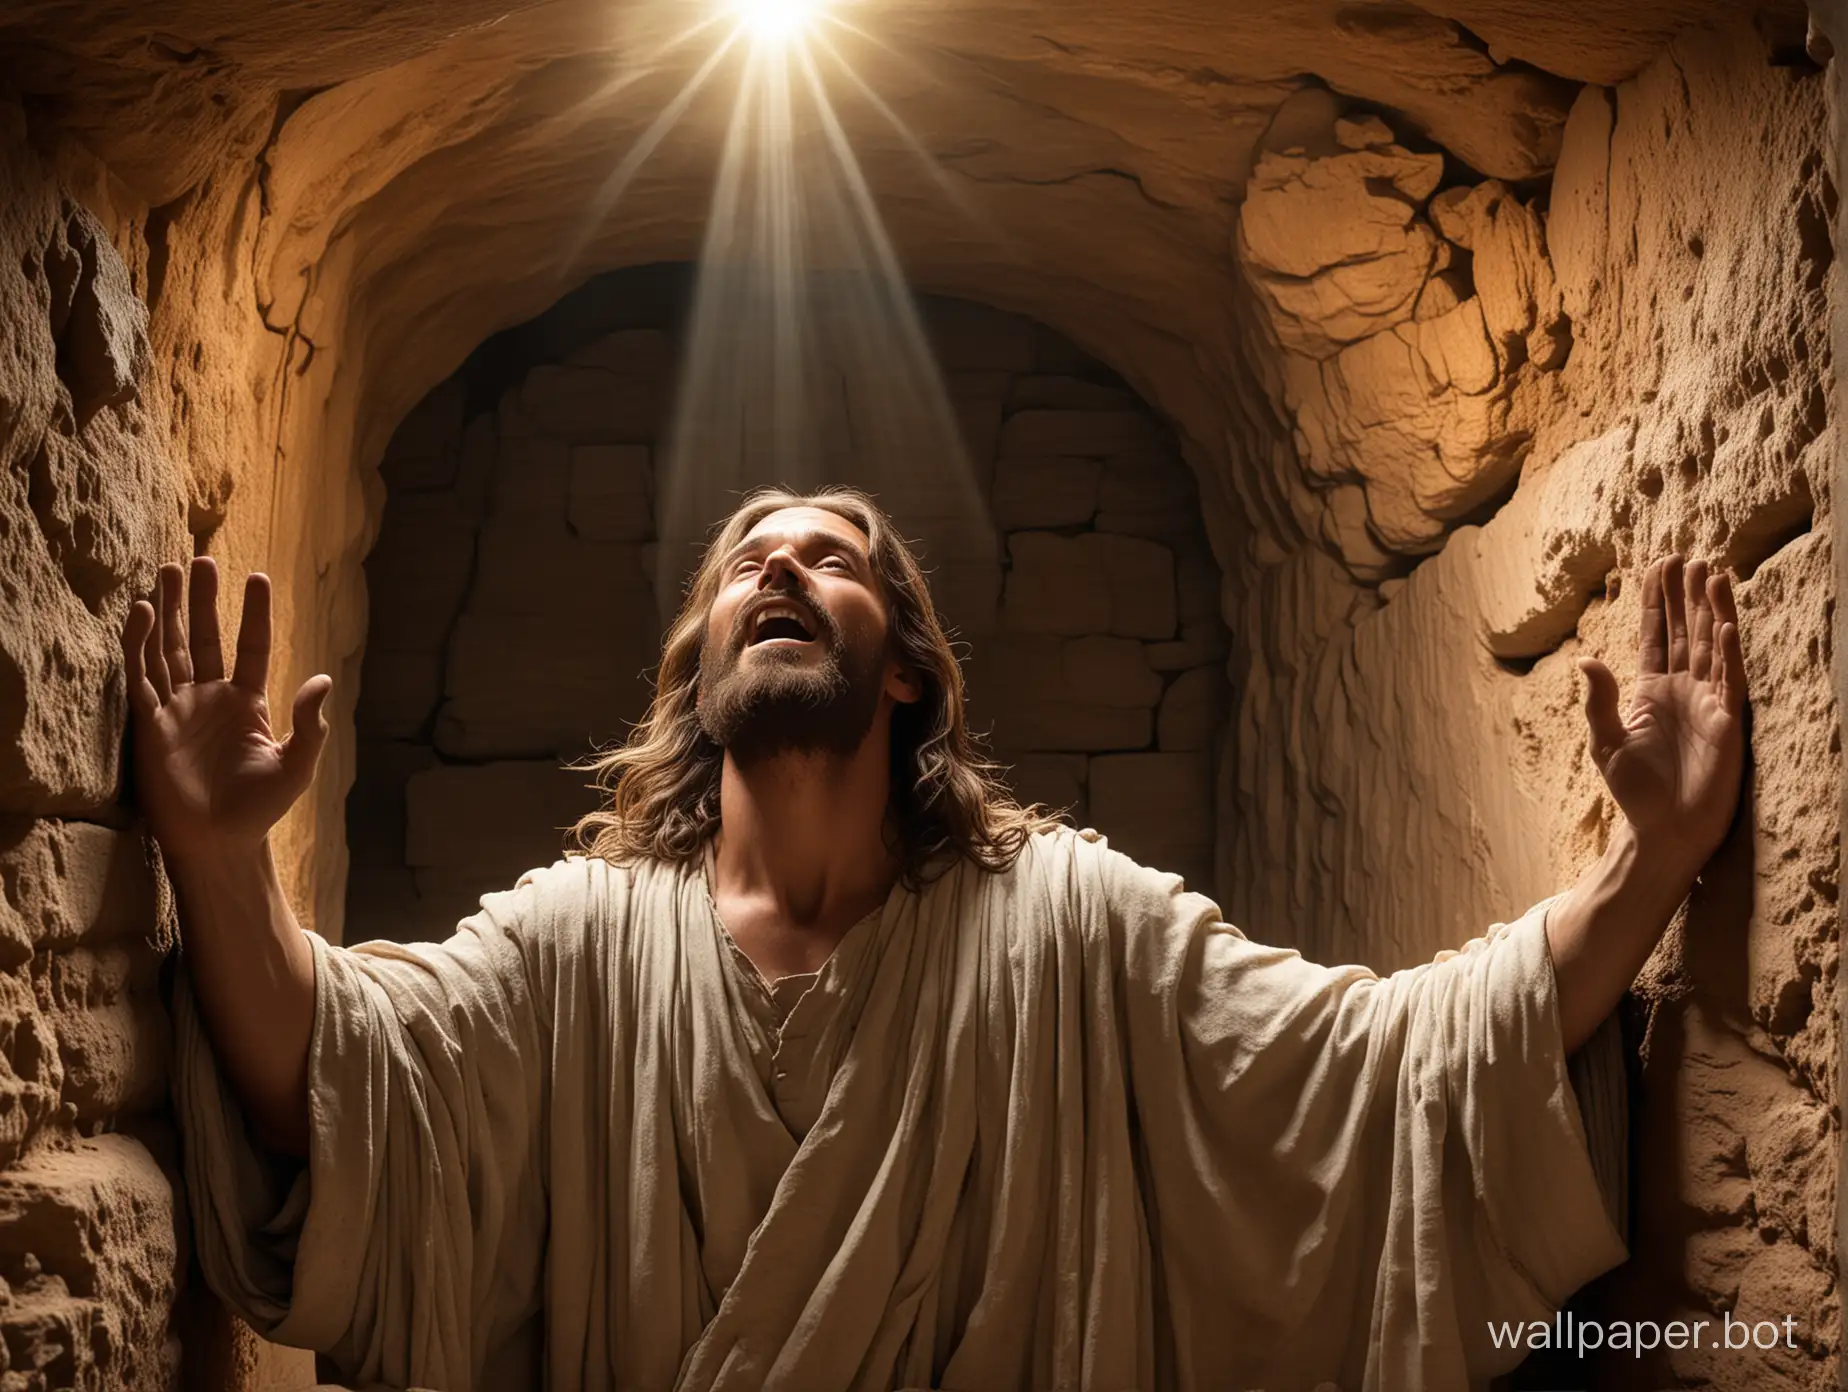 Resurrected-Jesus-Emerges-from-Open-Tomb-in-Dramatic-Photograph